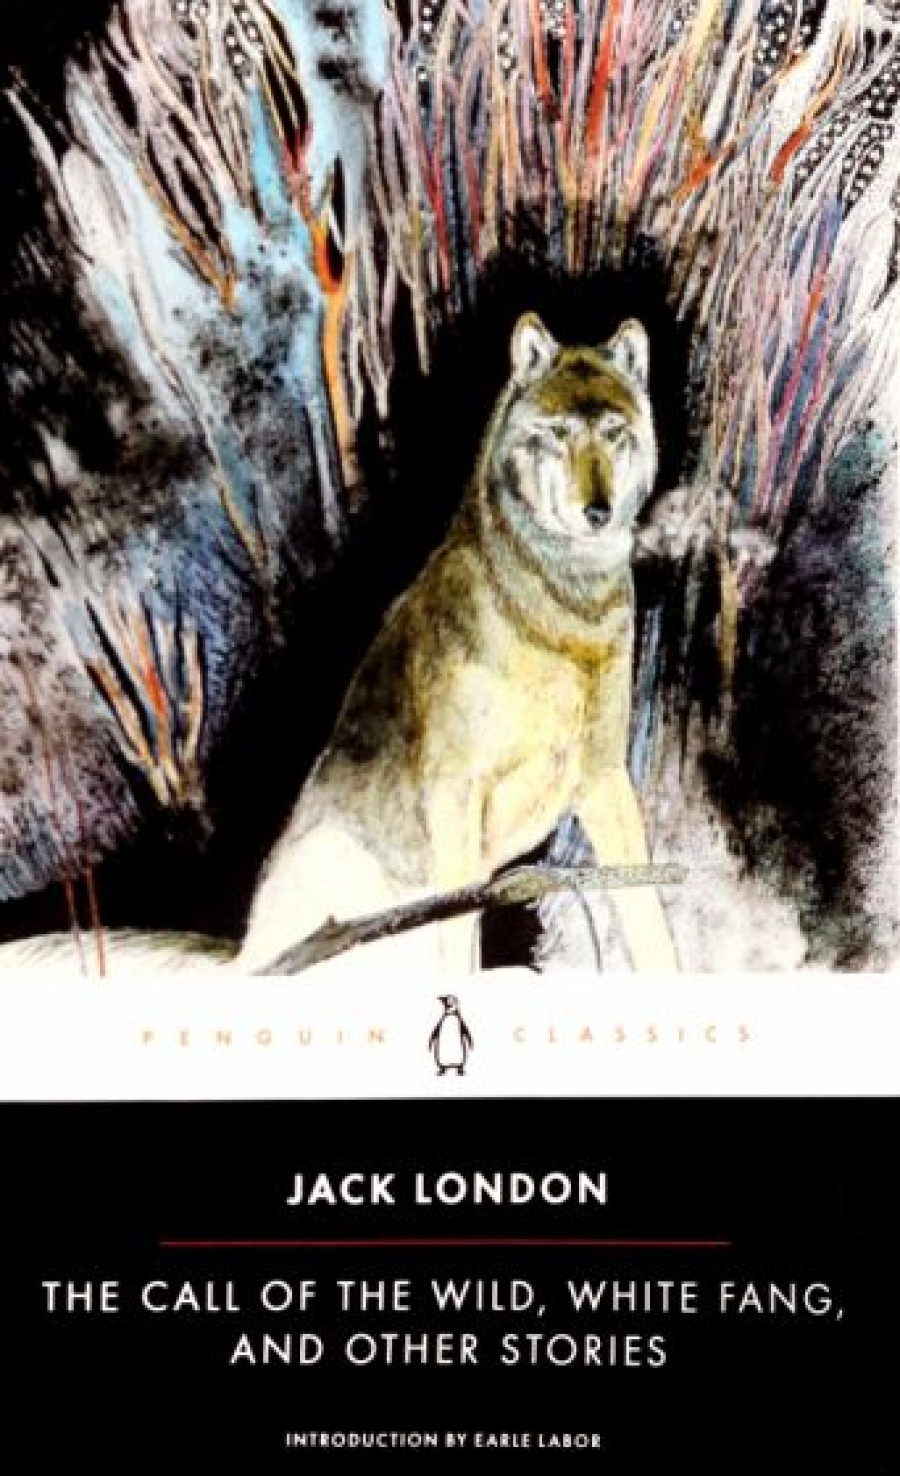 Jack London The Call of the Wild, White Fang and Other Stories 